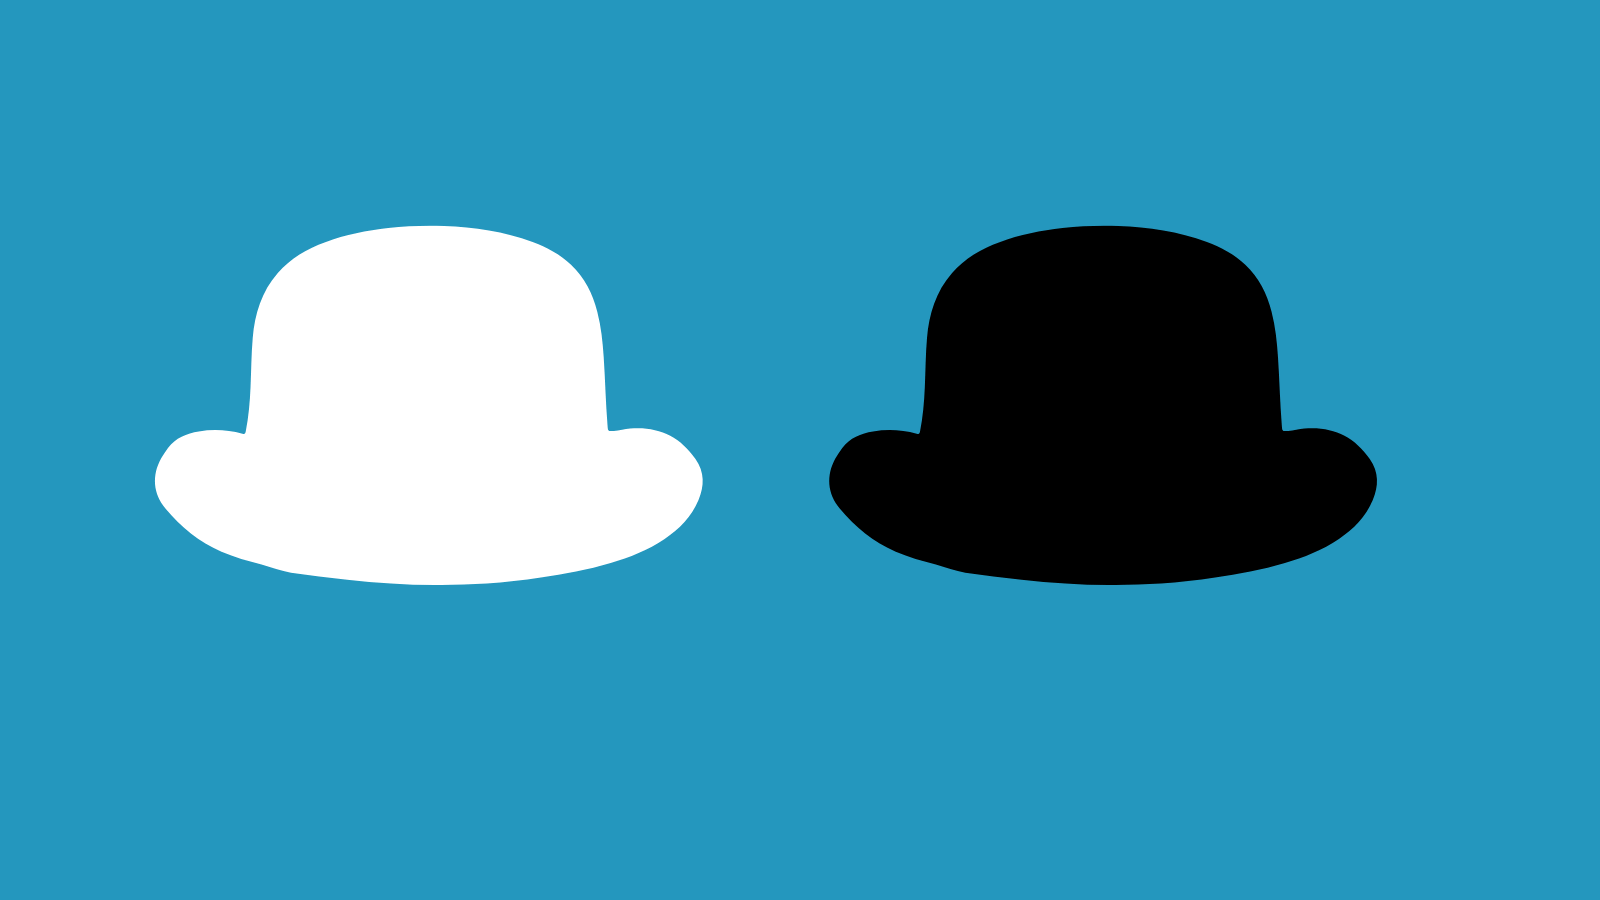 A white hat and a black hat